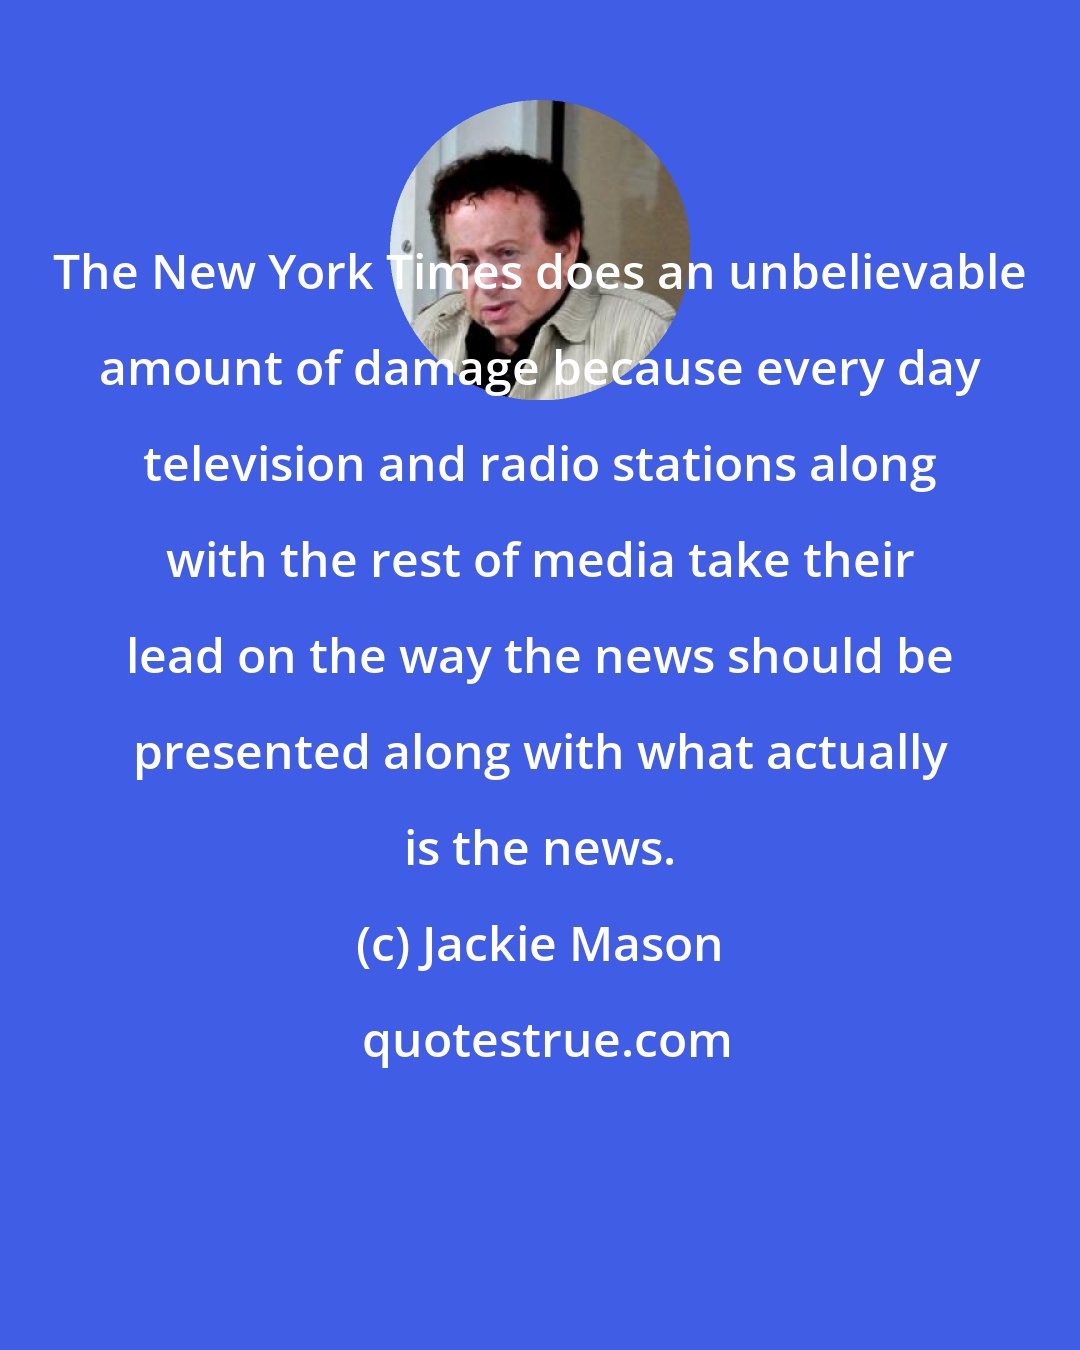 Jackie Mason: The New York Times does an unbelievable amount of damage because every day television and radio stations along with the rest of media take their lead on the way the news should be presented along with what actually is the news.